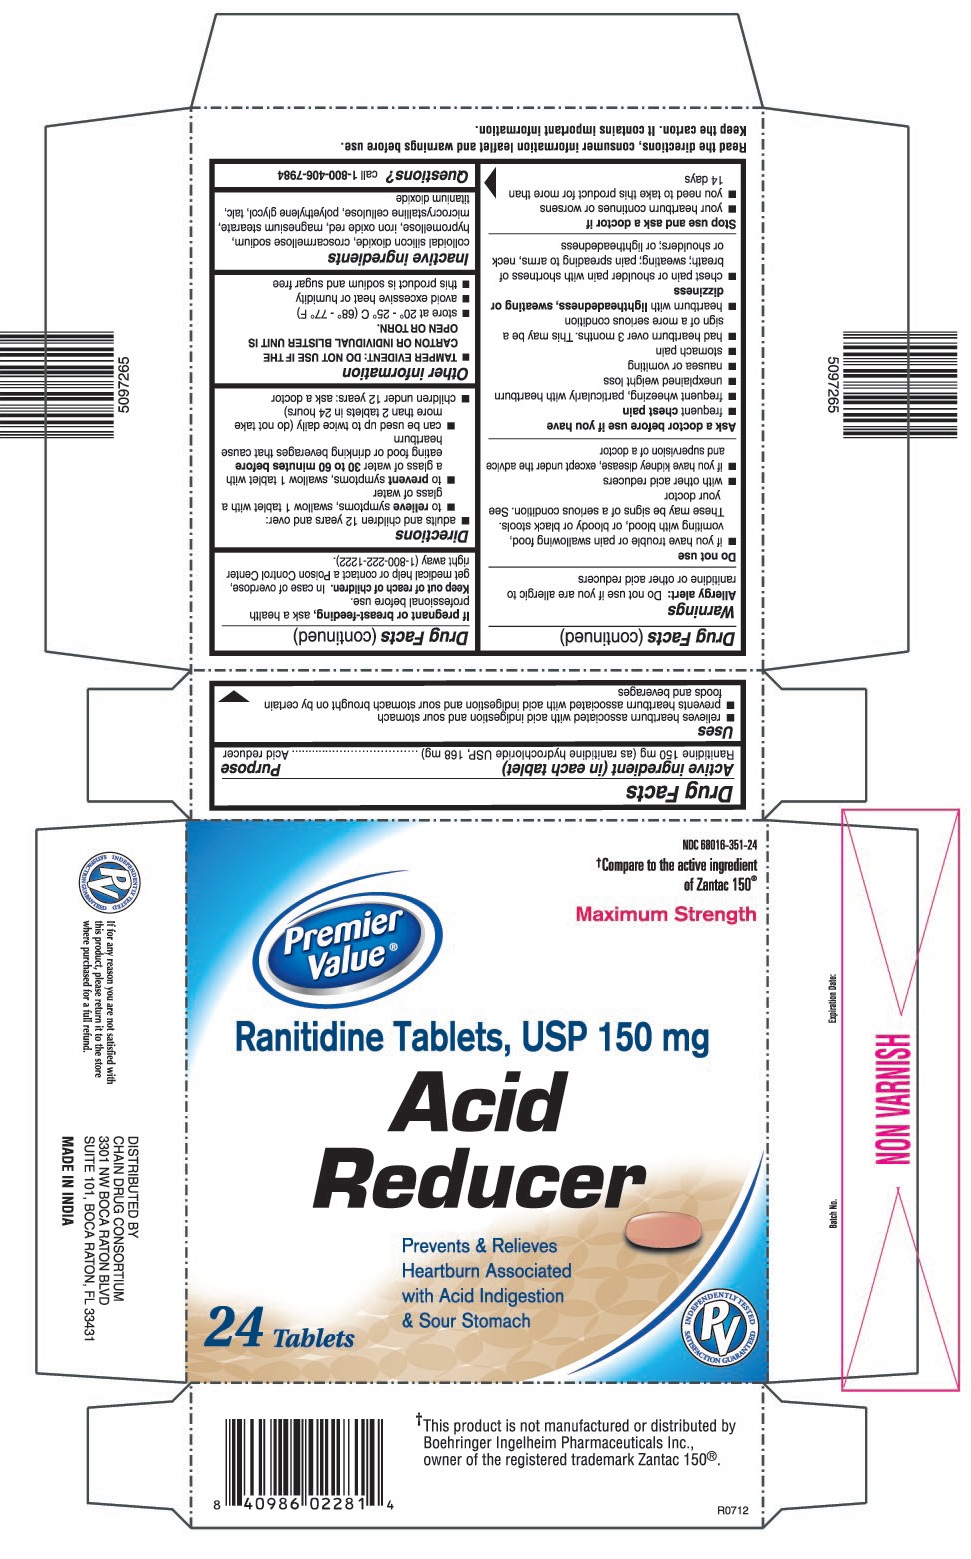 This is the Premier Value 24 count blister carton label for Ranitidine Tablets, USP 150 mg.